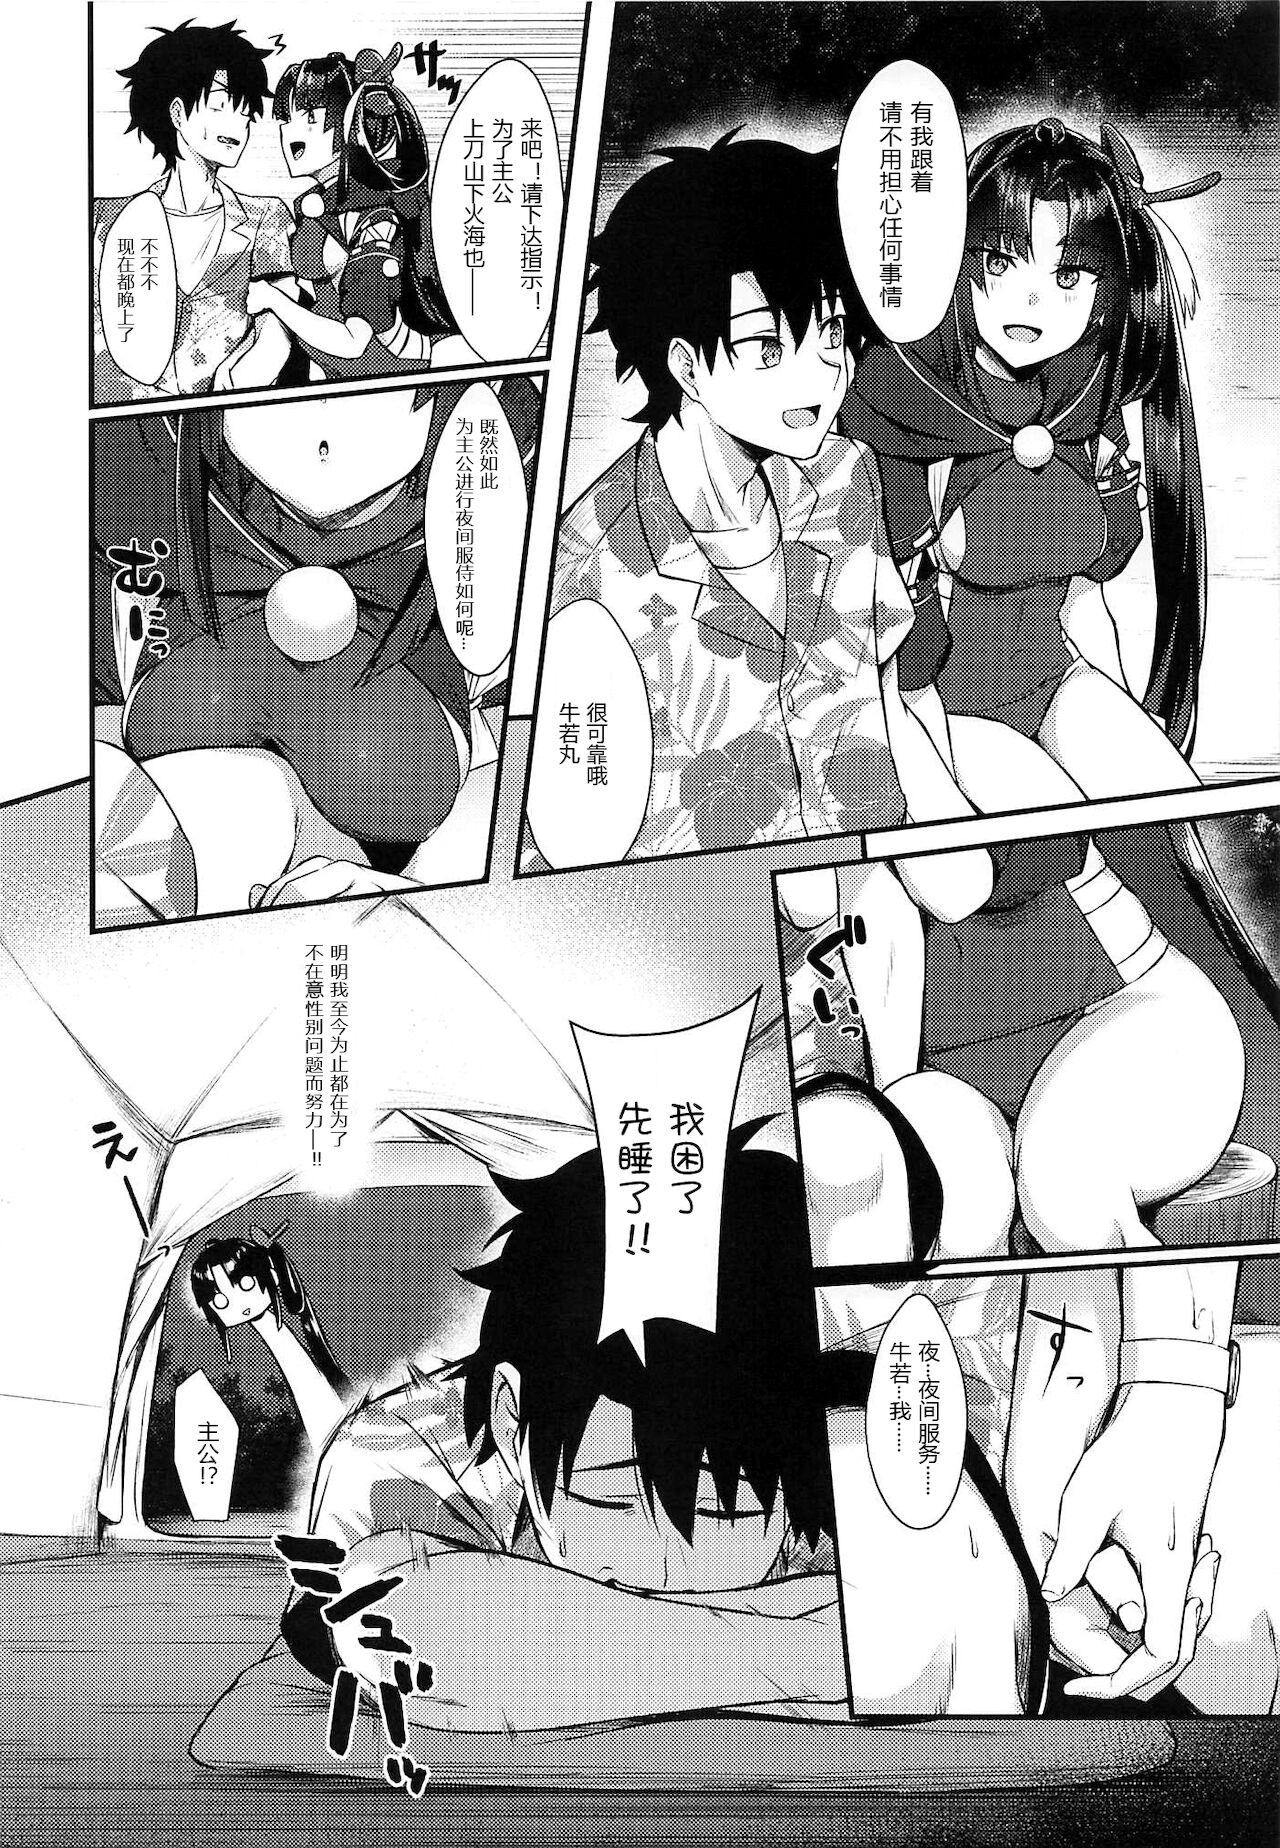 Camwhore Ponpoko Summer Camp - Fate grand order Gayporn - Page 4